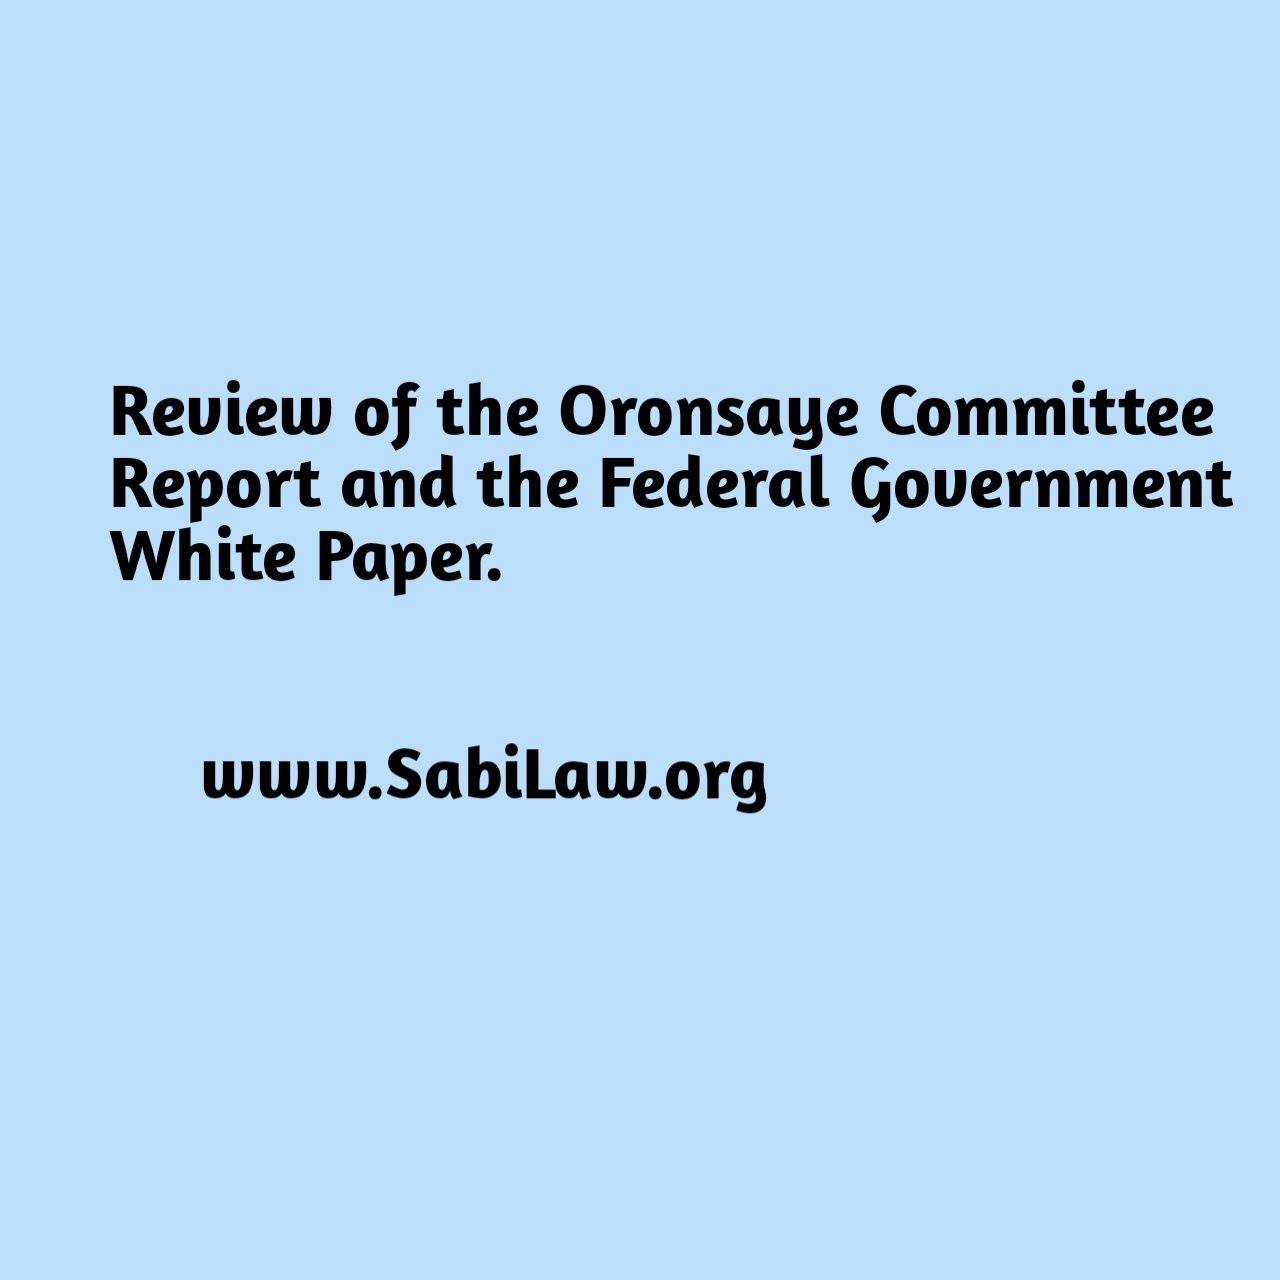 Review of the Oronsaye Committee Report and the Federal Government White Paper